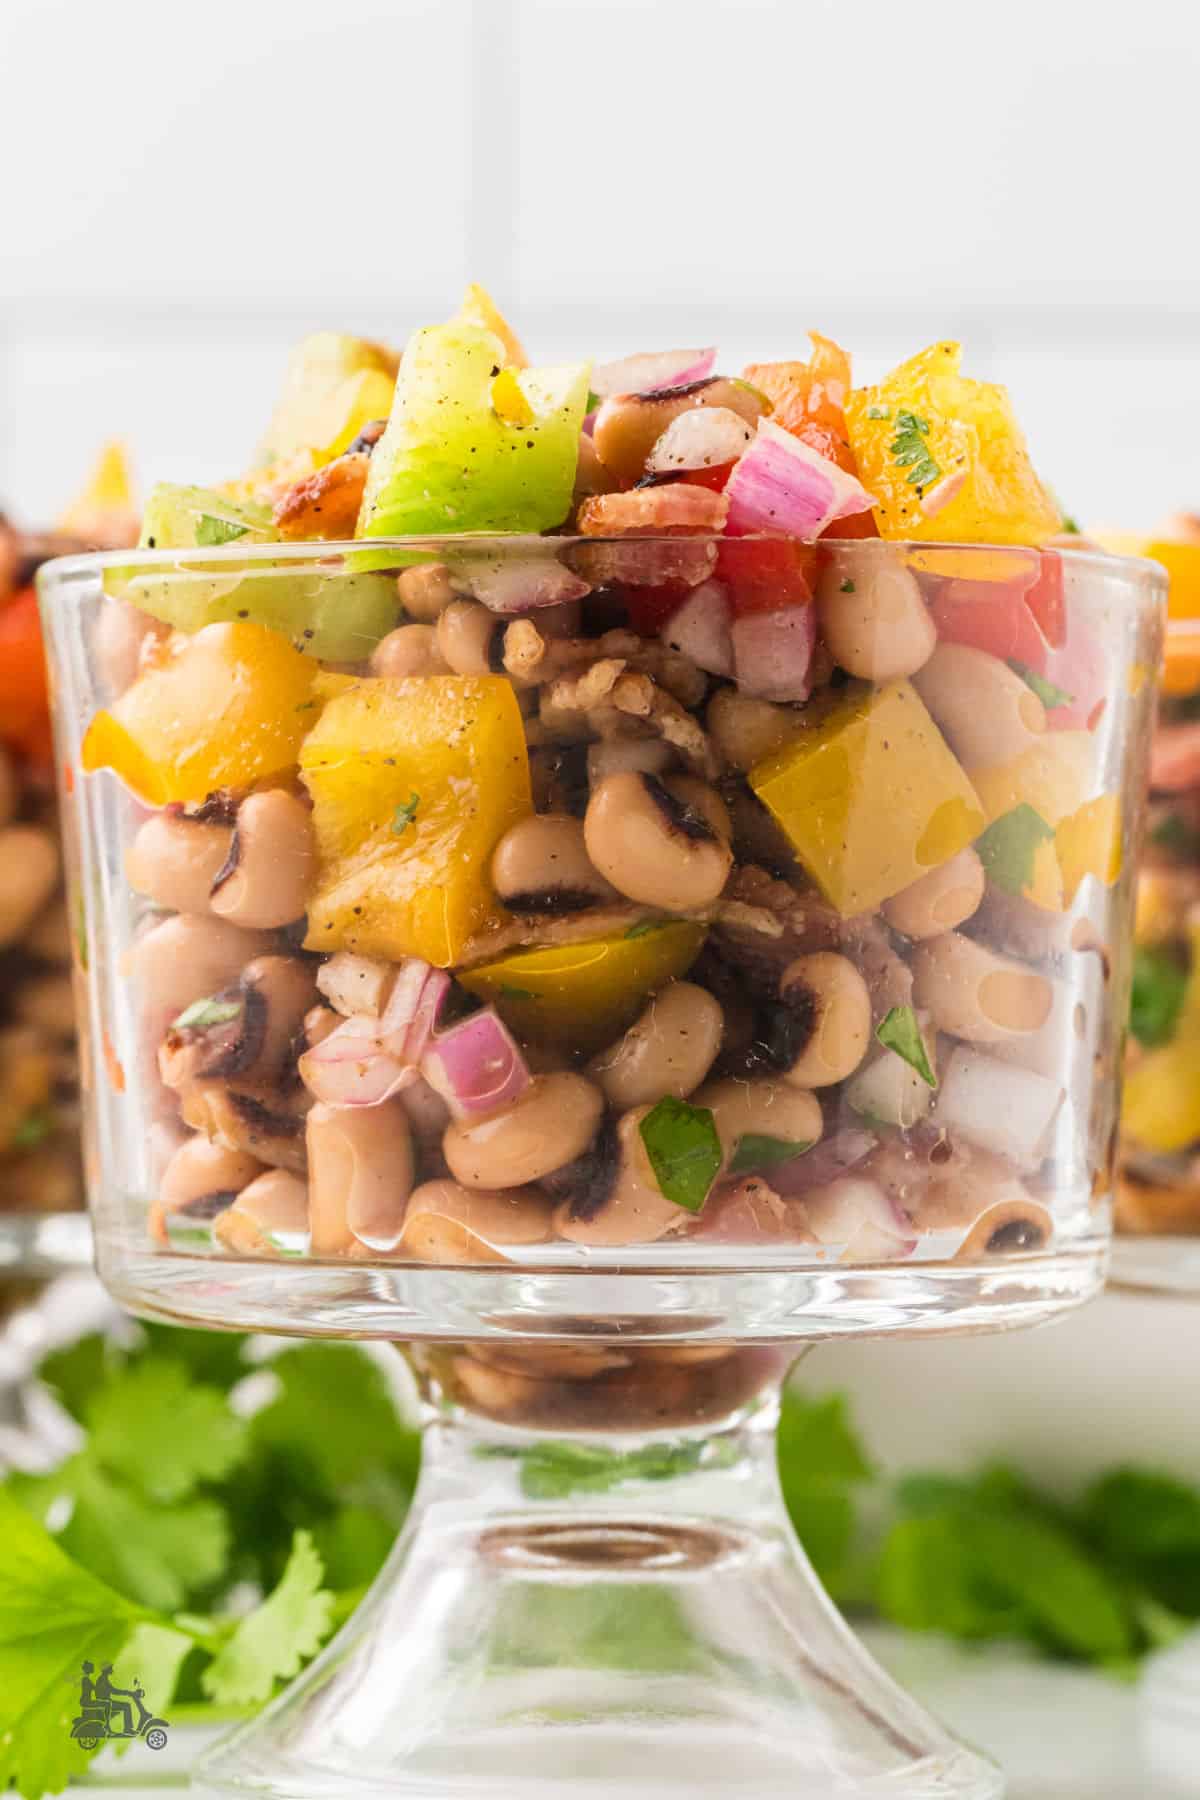 Bean salad made with black-eye peas is placed in a clear glass-footed serving bowl. 